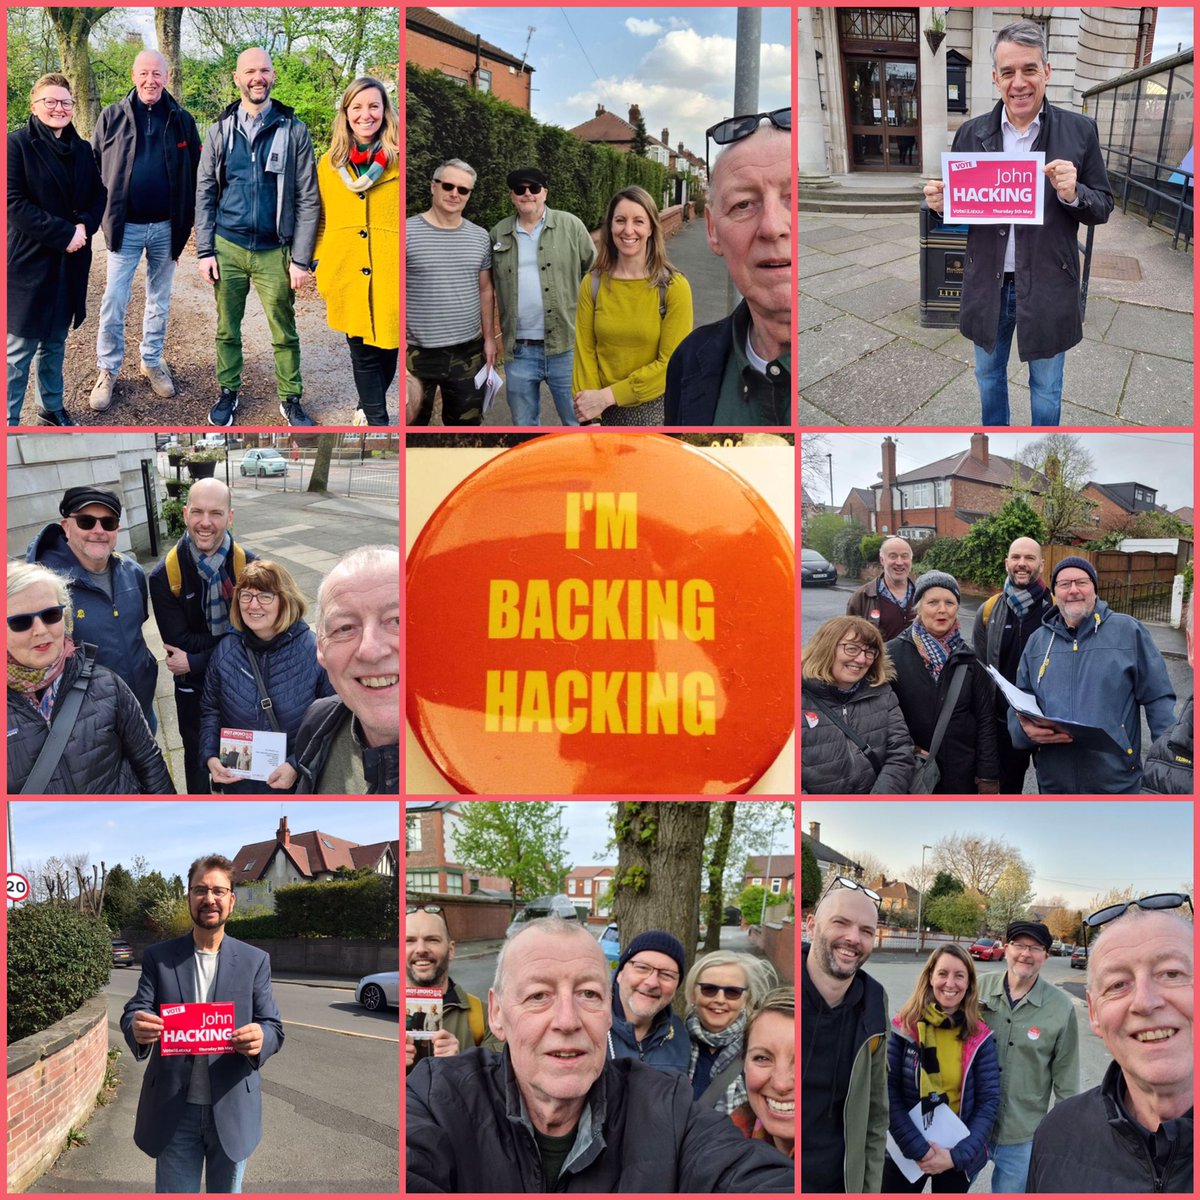 Campaign images. 💕 Thank you to all the @ChorltonLabour members and residents who are giving me their support. It is very much appreciated. 🗳🌹🗳🌹#votelabourmay5th #backinghacking